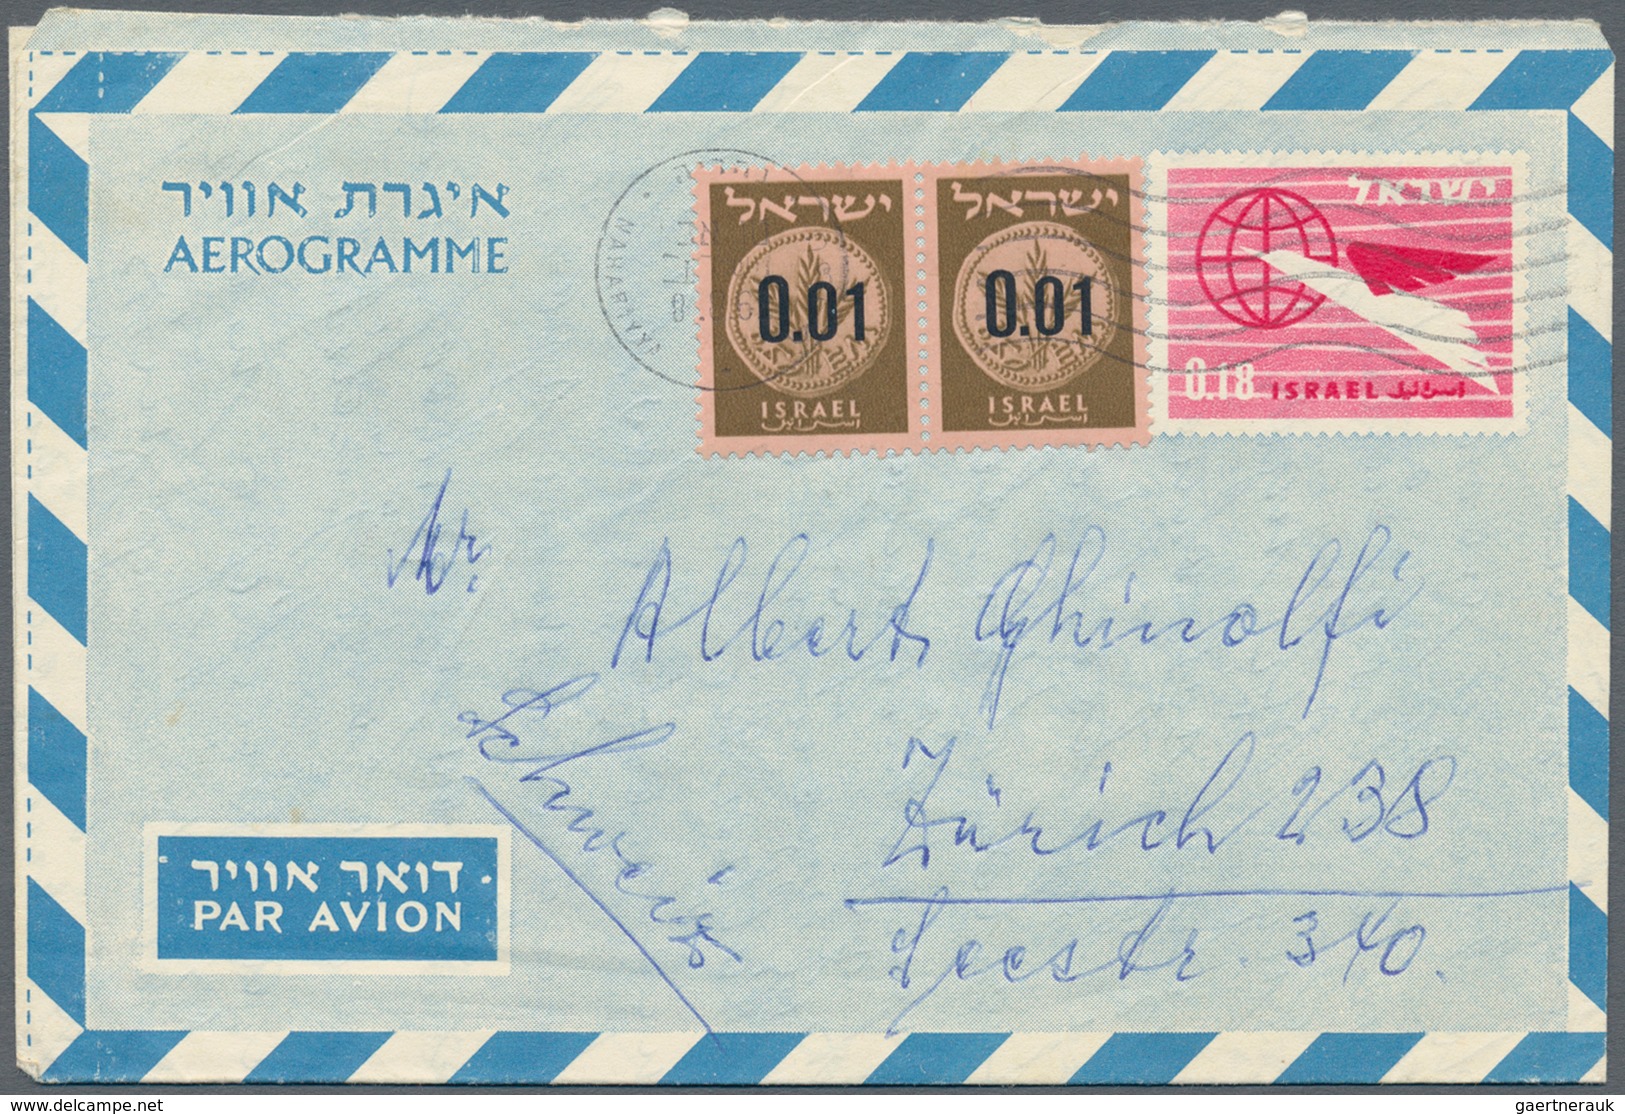 Israel: 1950/2008, STATIONERIES, holding of apprx. 520 unused and used cards/aerogrammes/envelopes,